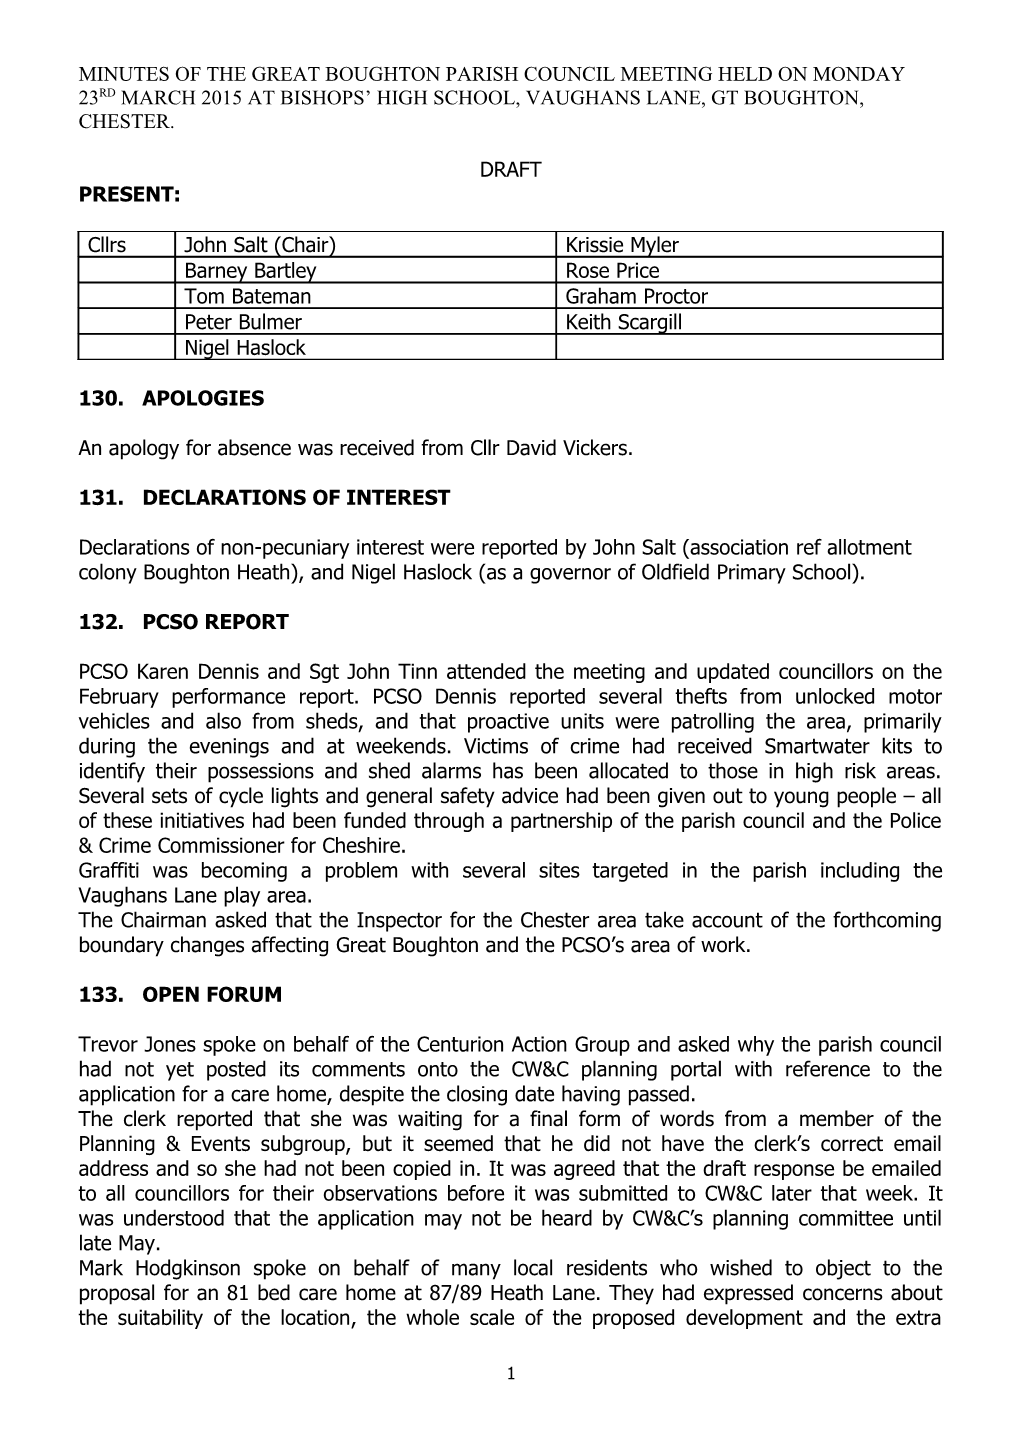 MINUTES of the GREAT BOUGHTON PARISH COUNCIL MEETING HELD on MONDAY 17Th OCTOBER 2005 AT